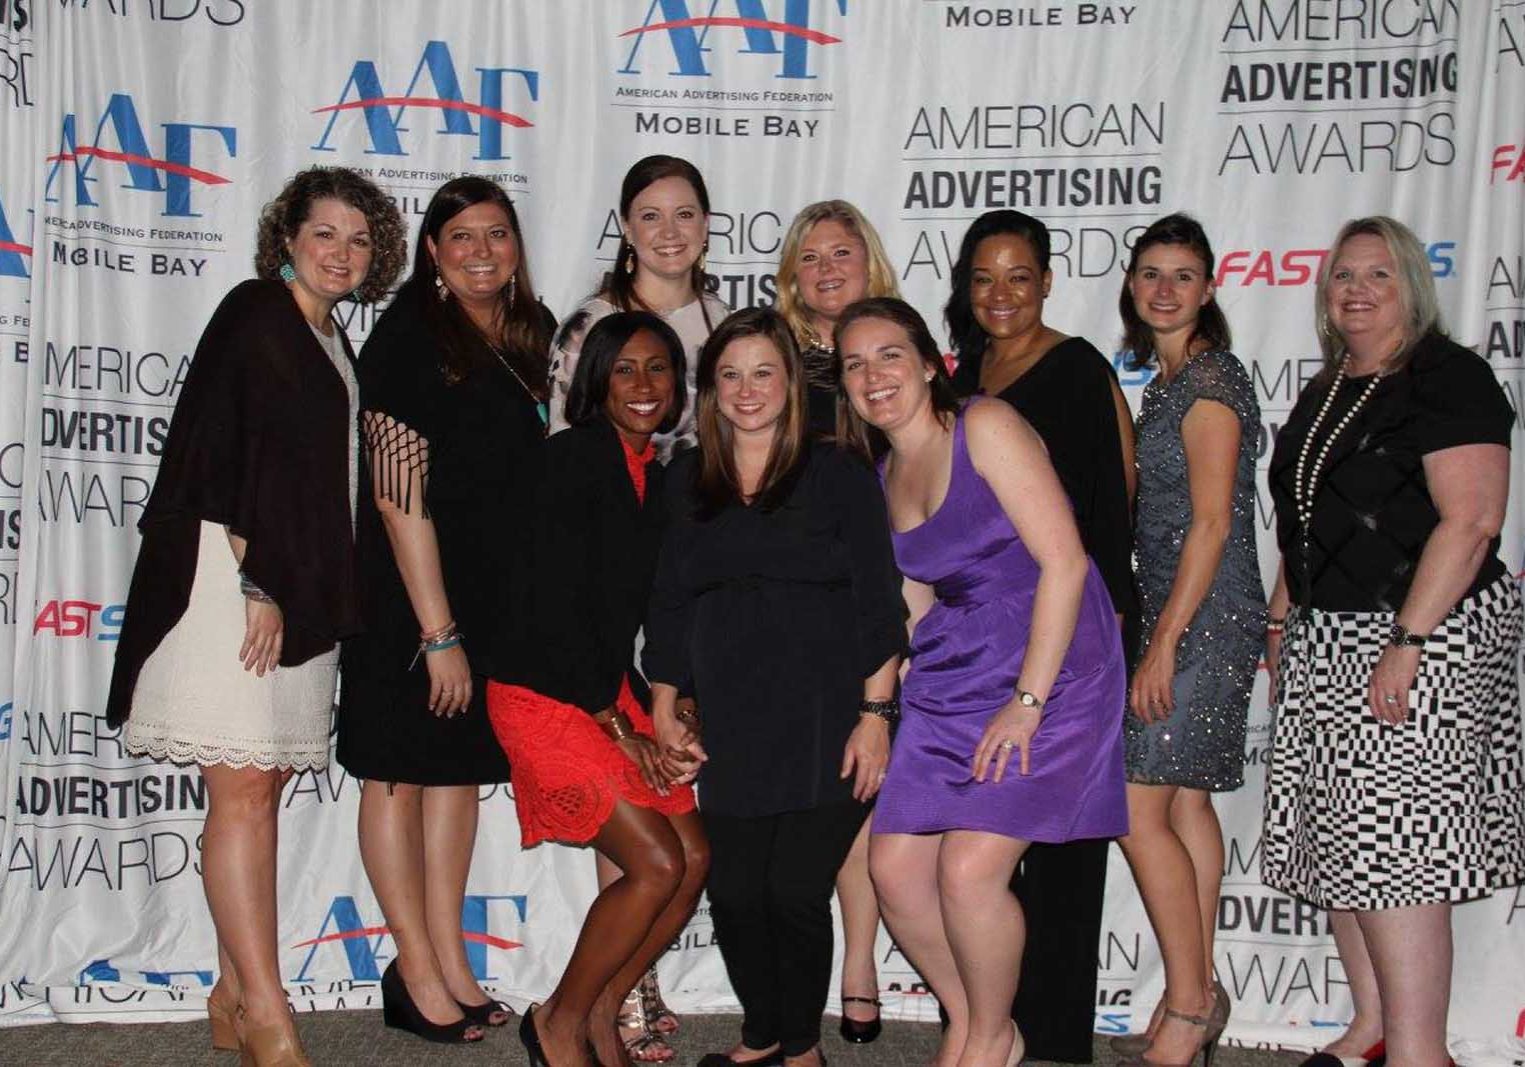 Nomination Period Open For American Advertising Awards